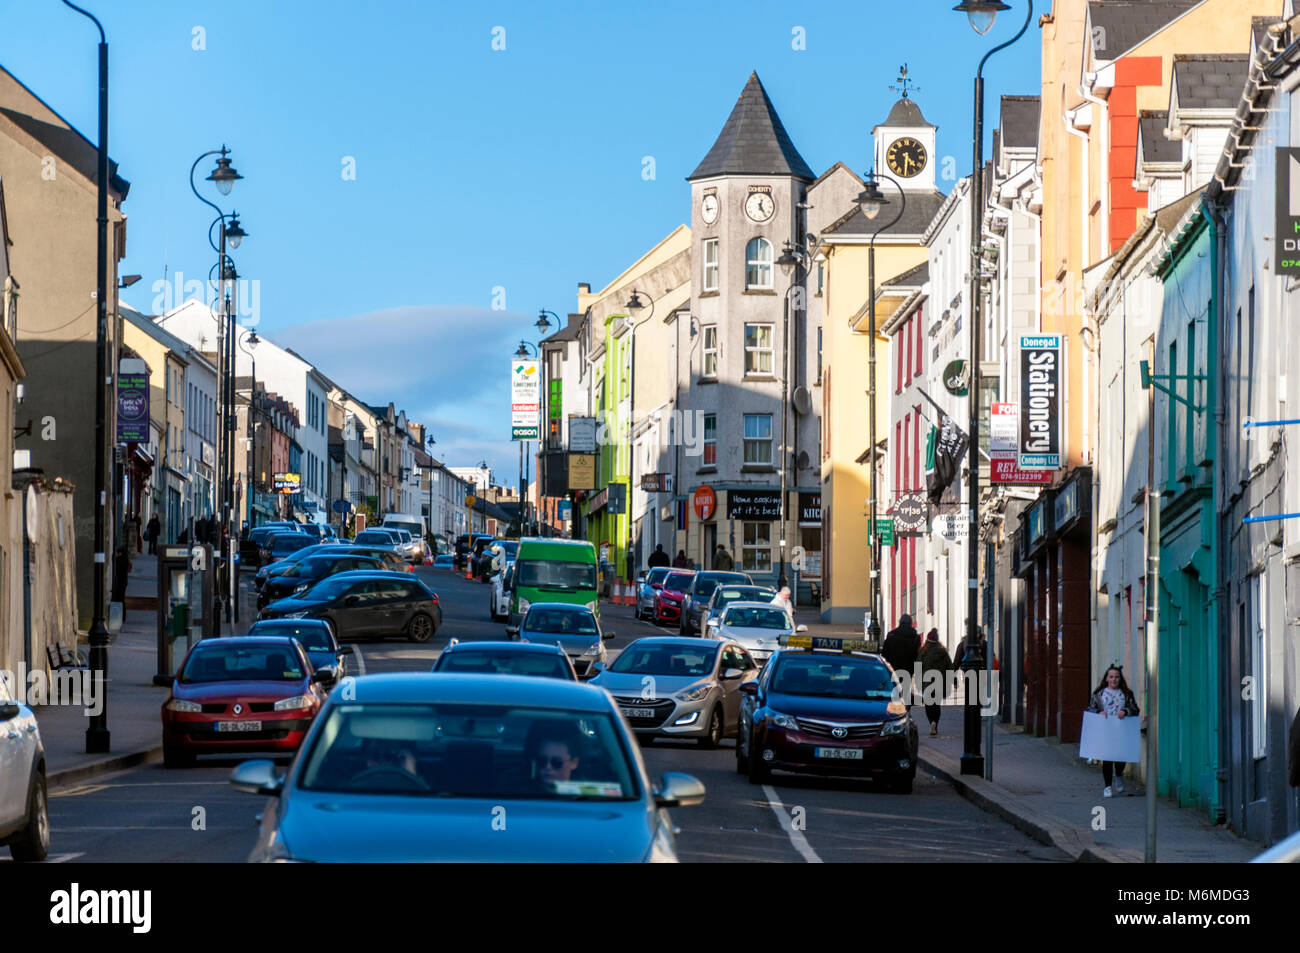 Lower Main Street in Letterkenny, County Donegal, Irland Stockfoto